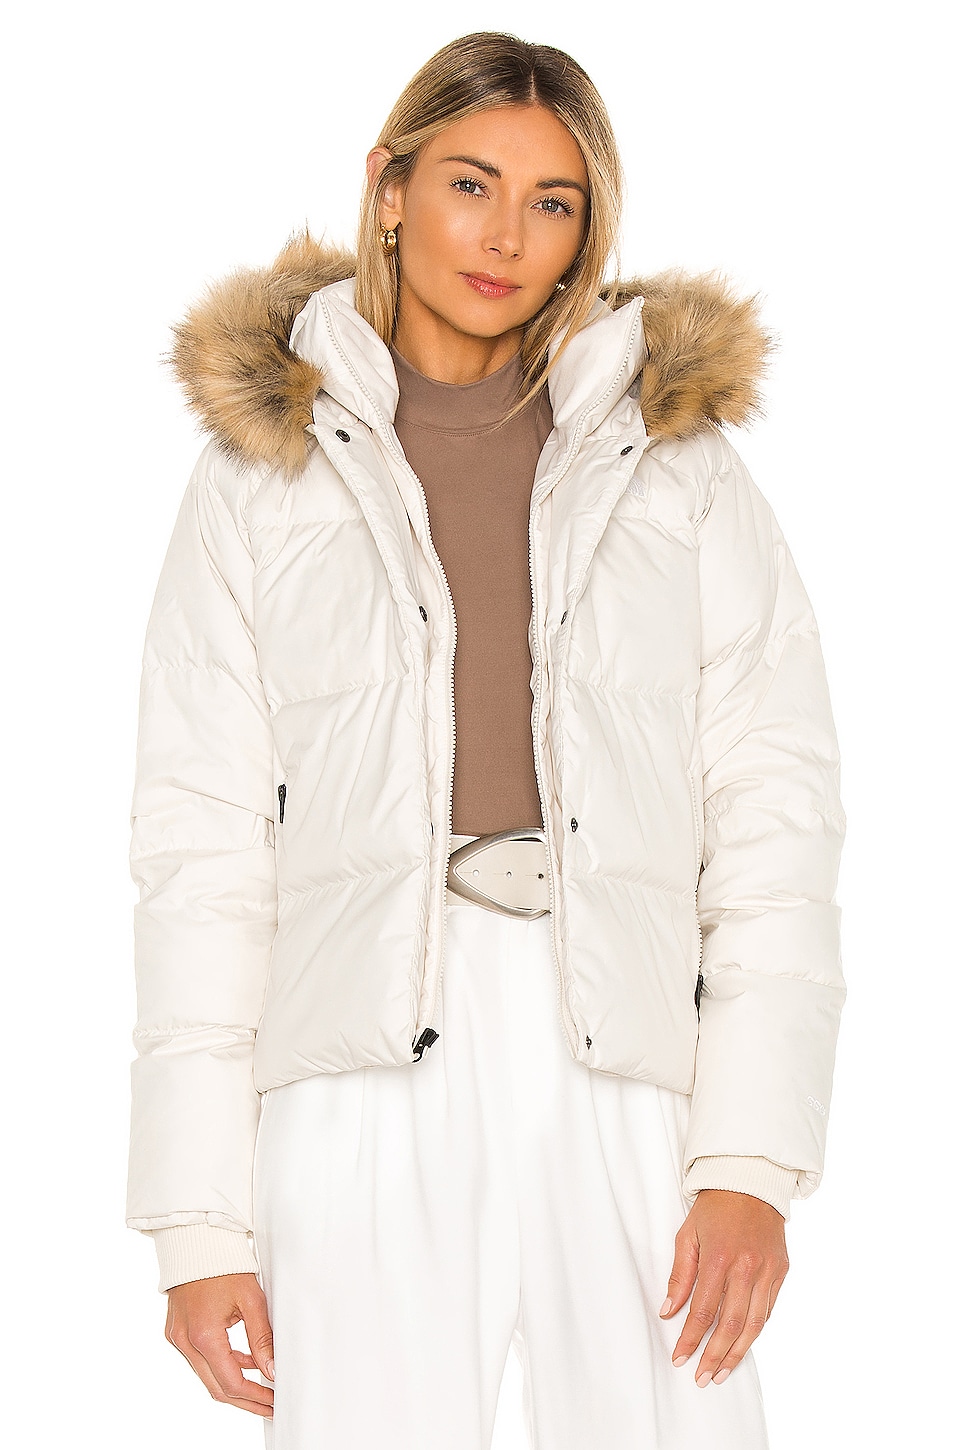 THE NORTH FACE DEALIO DOWN CROP JACKET WITH FAUX FUR TRIM,TNOR-WO84